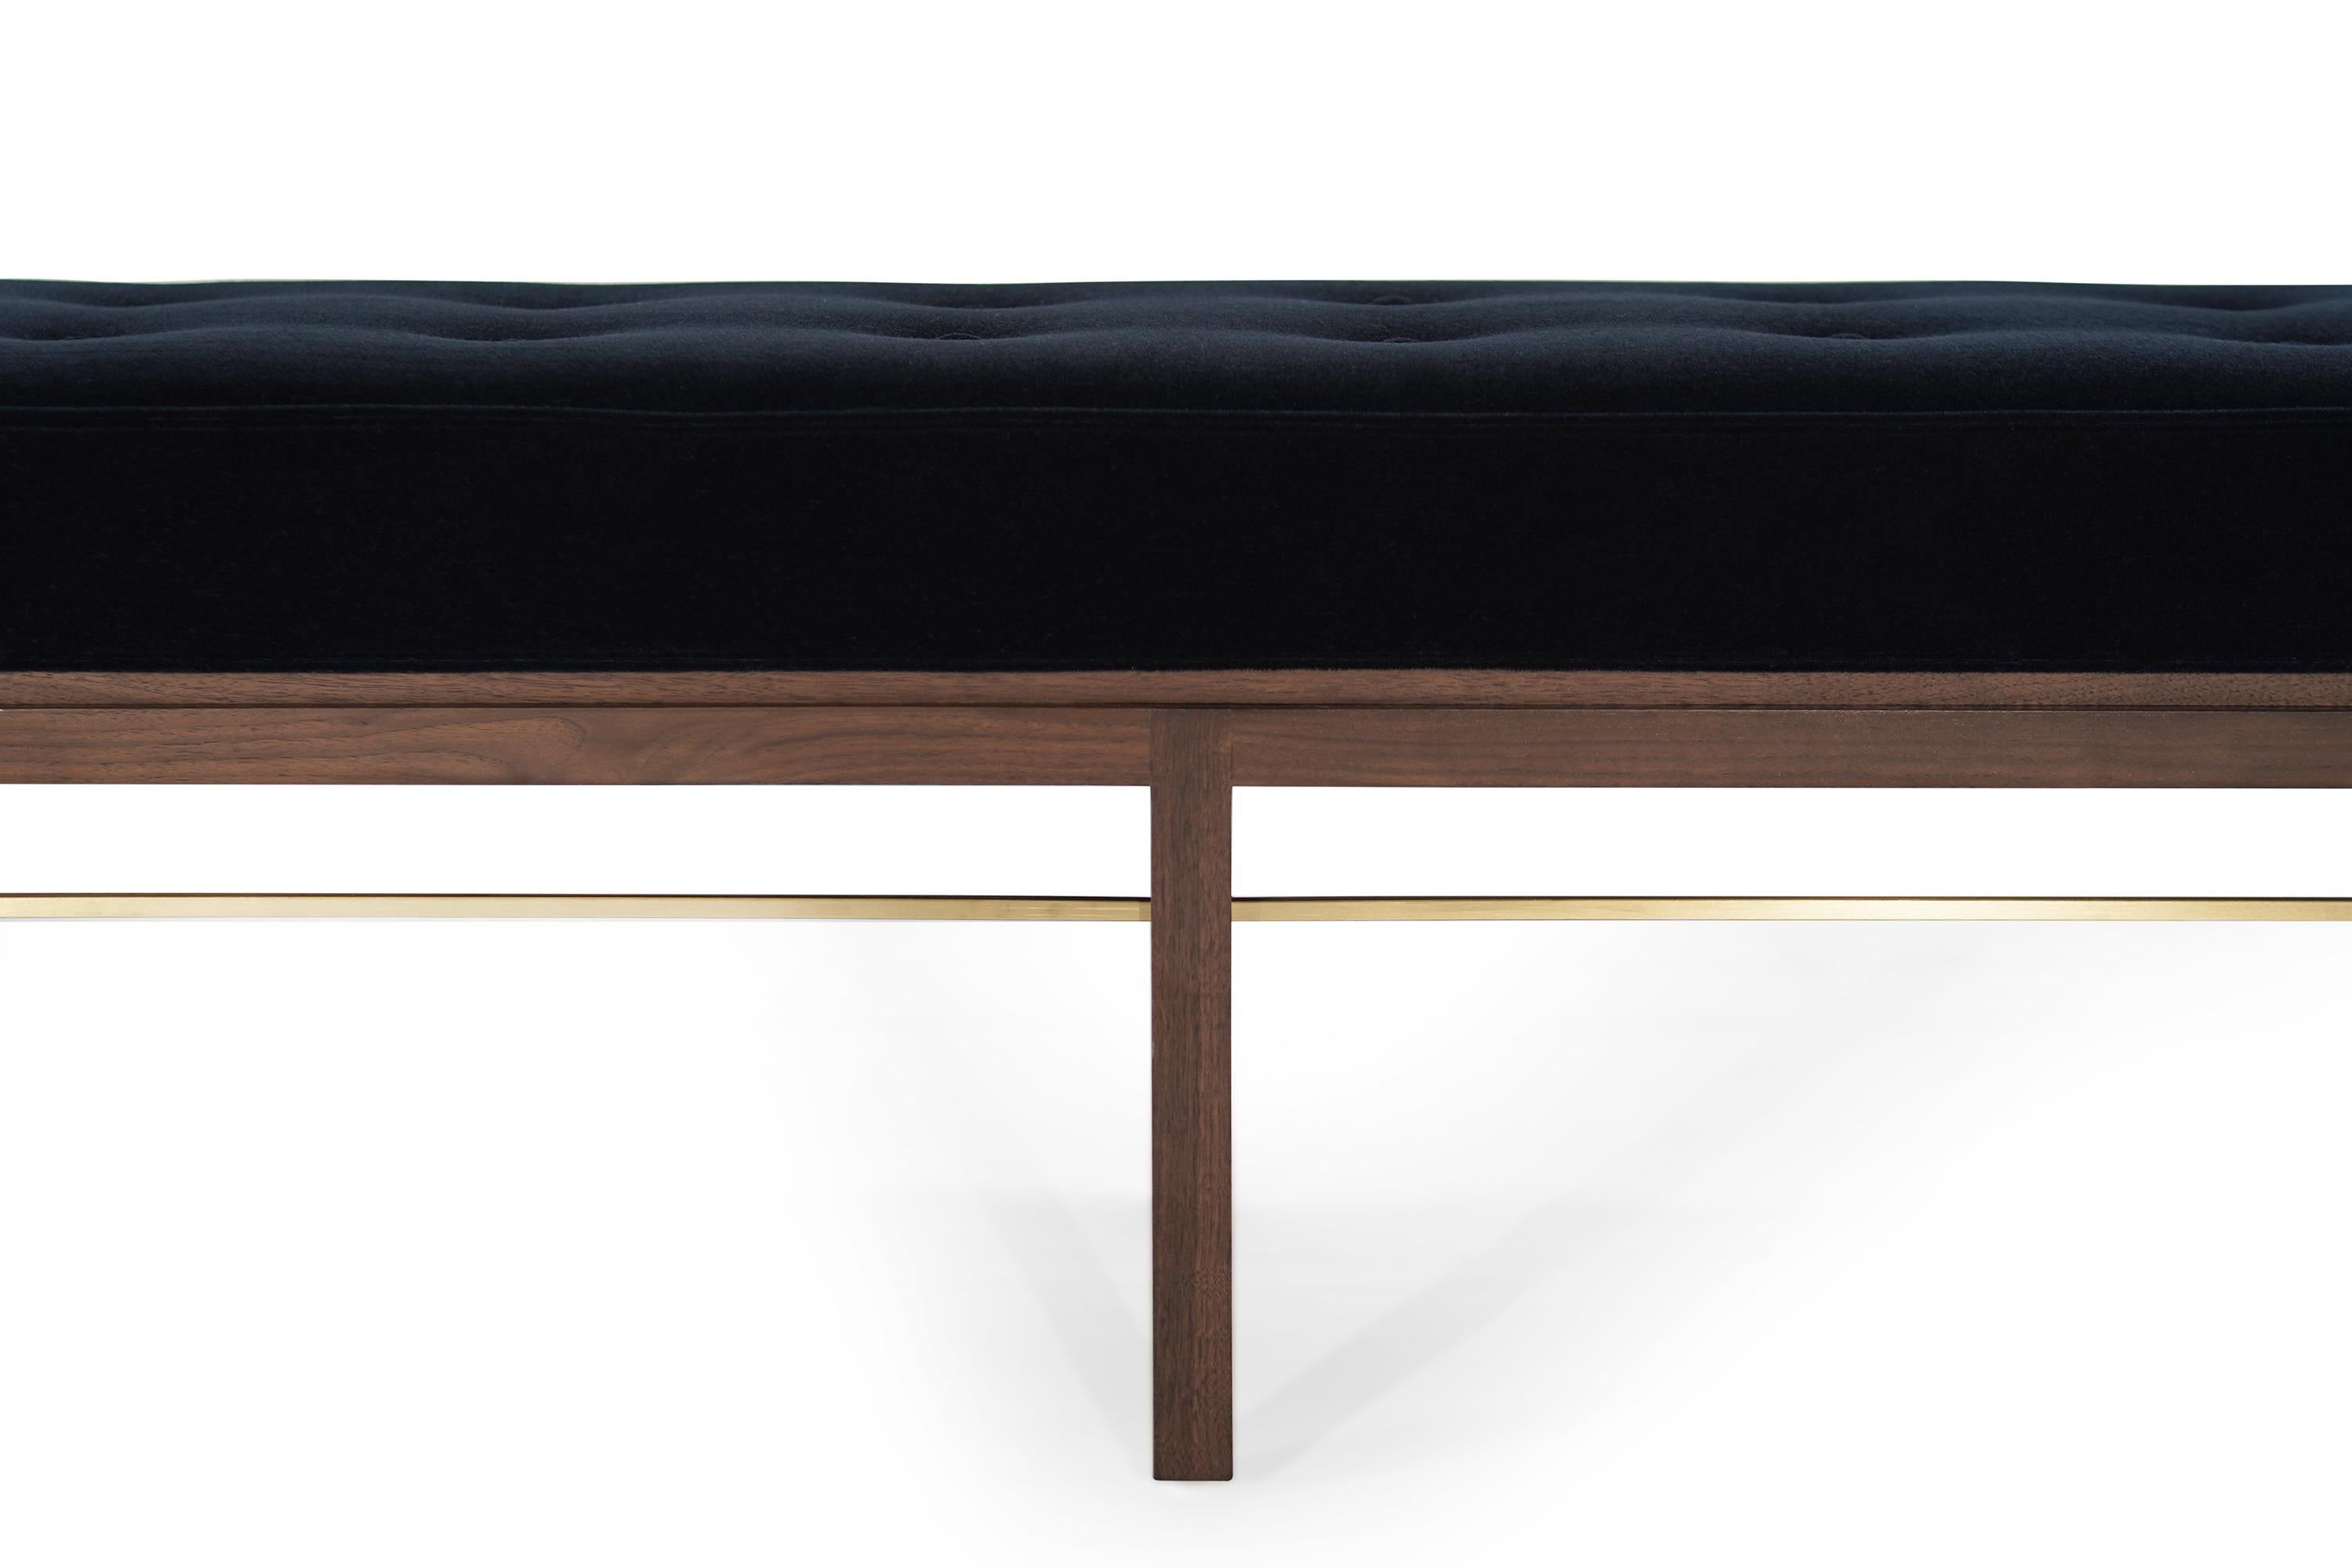 American Brass-Accented Edward Wormley for Dunbar Bench in Mohair, 1950s